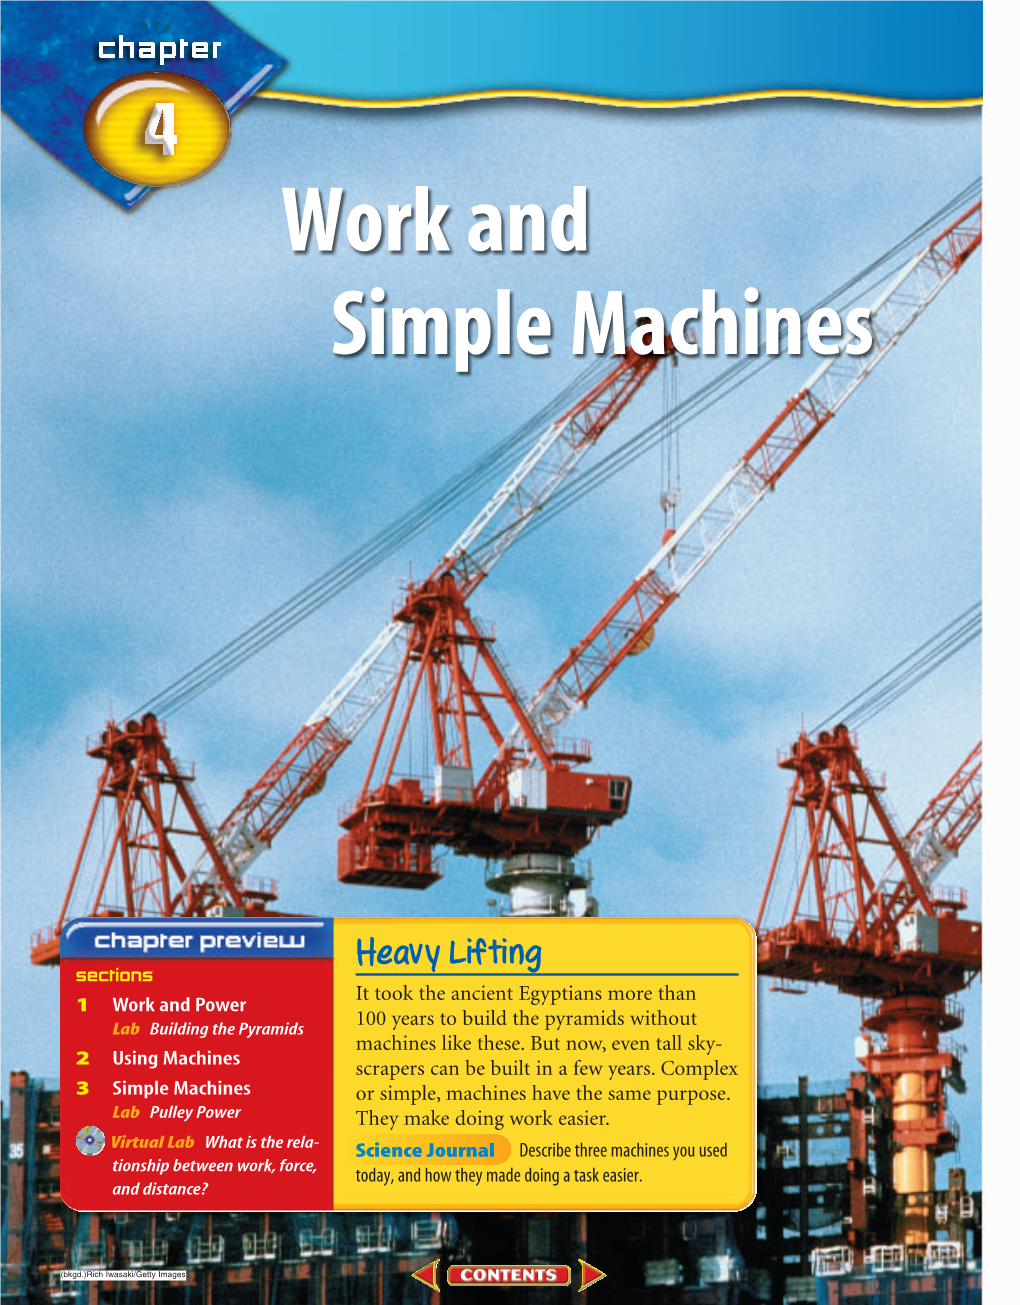 Chapter 4: Work and Simple Machines